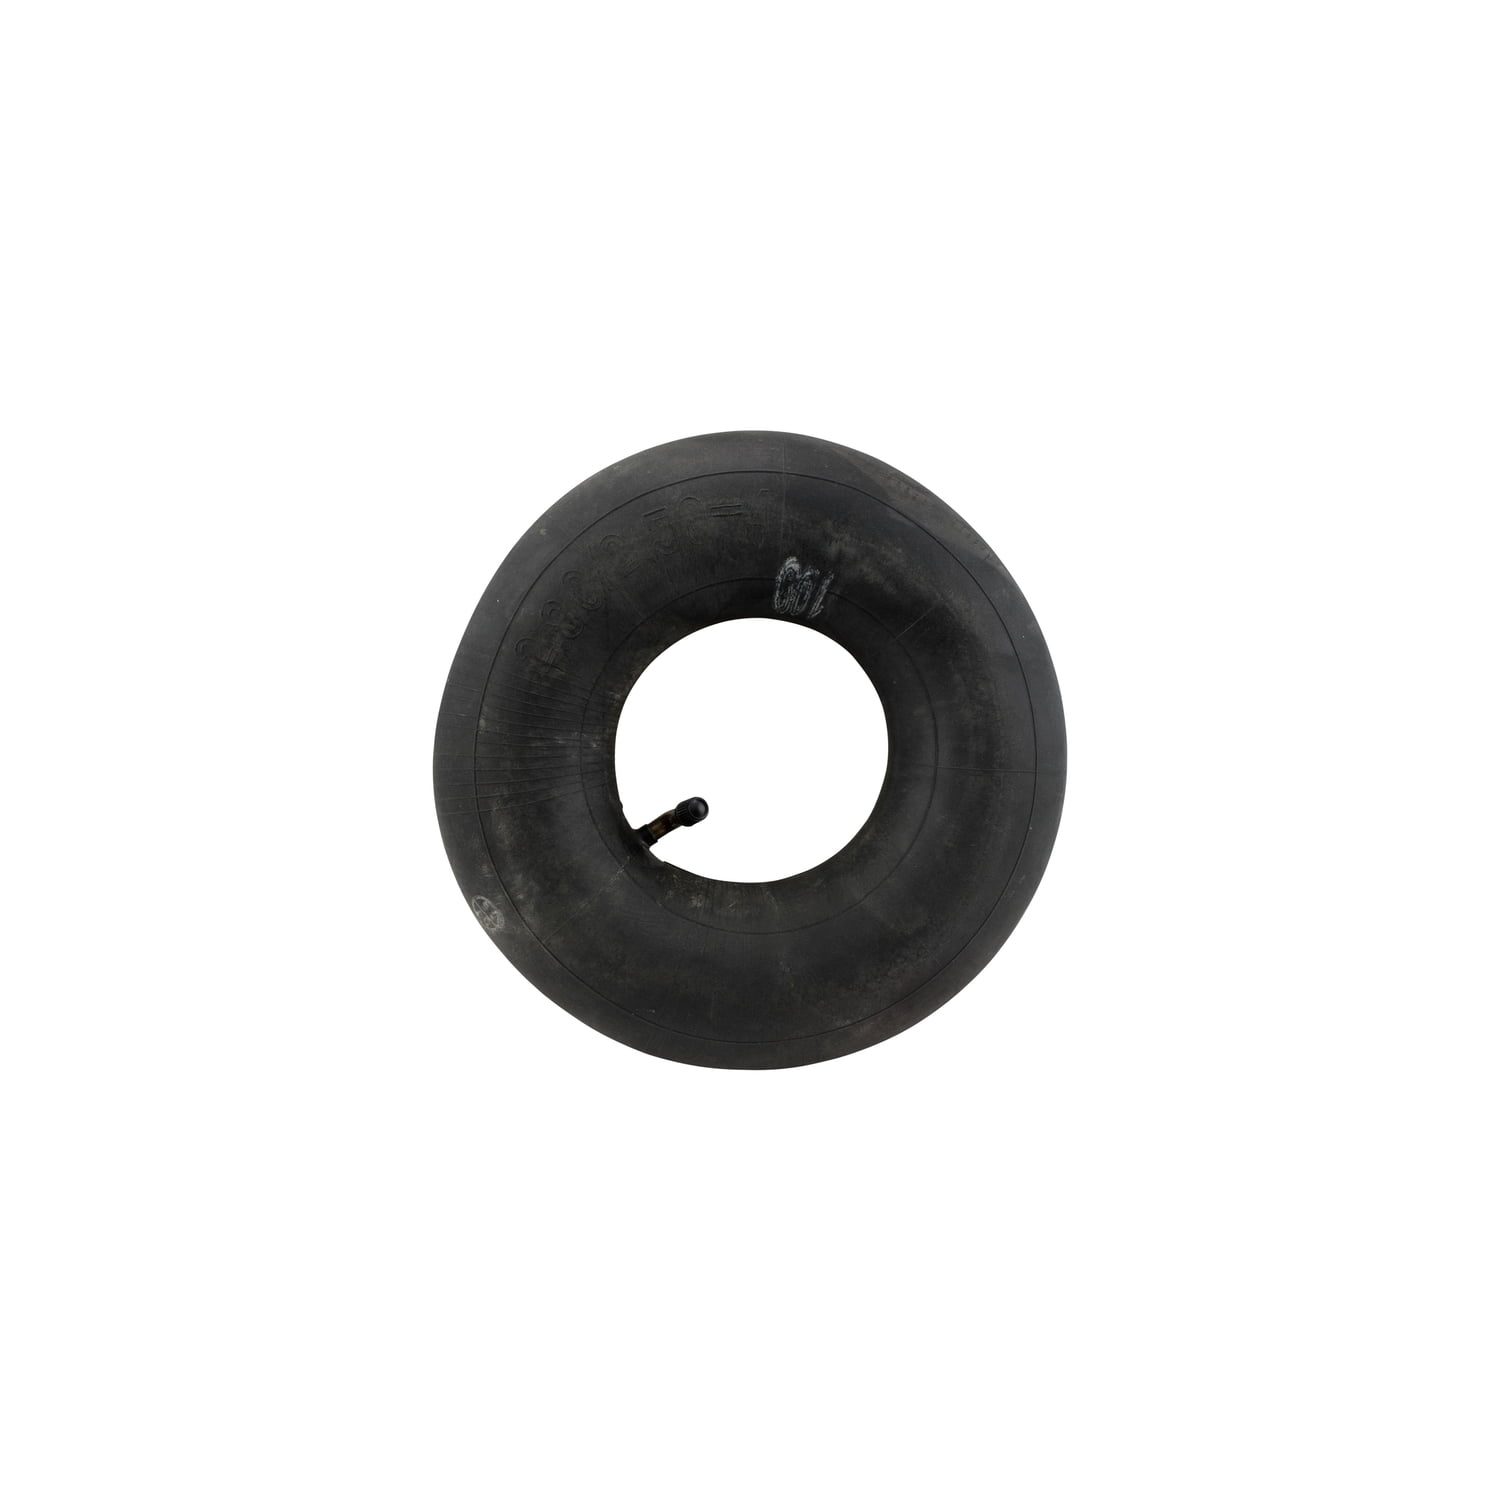 NEW Lawn Equpiment Part Toro 3290-346 Push-On *FREE SHIPPING* 